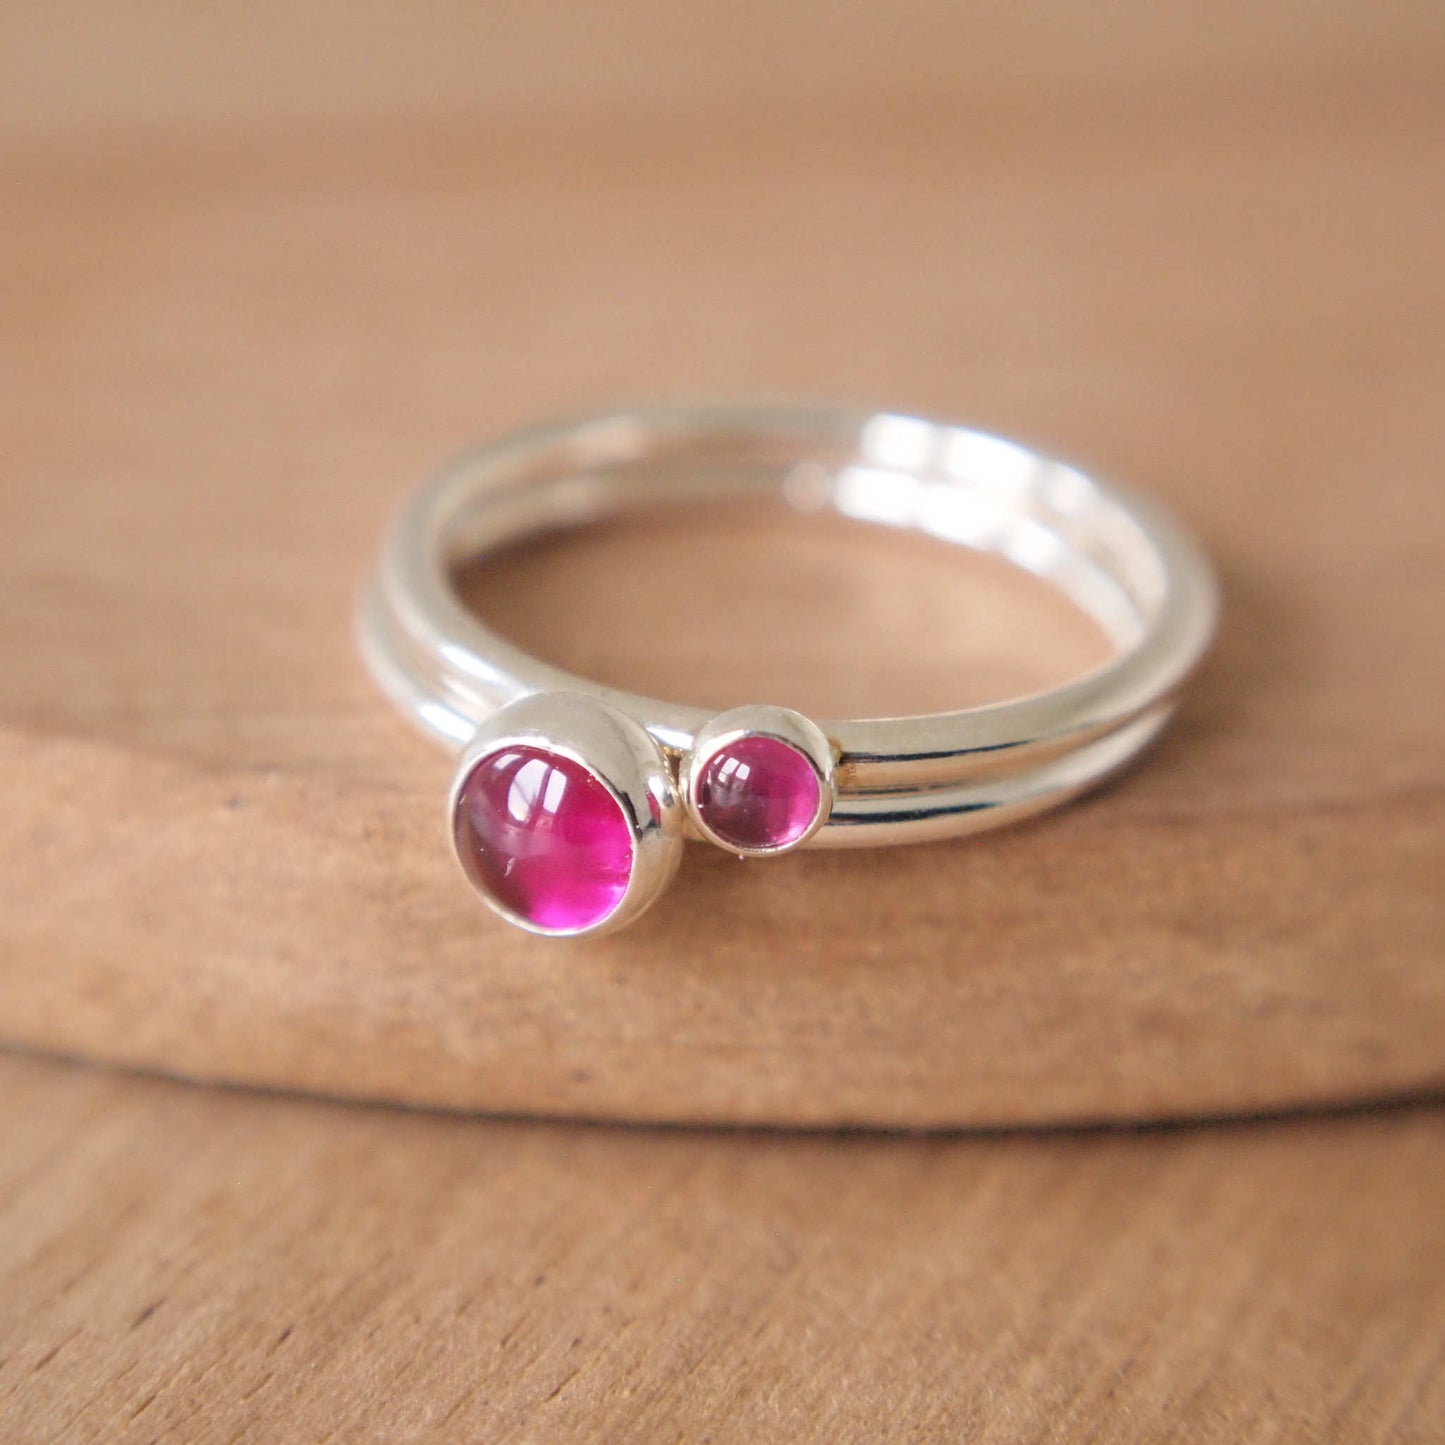 Double Ring set in Sterling Silver and hot pink Lab Ruby gemstones, The rings have two round gemstones of 5mm and 3mm size and are set simply onto round bands of sterling silver. These are July's birthstone and are handmade to your ring size by maram jewellery in Scotland